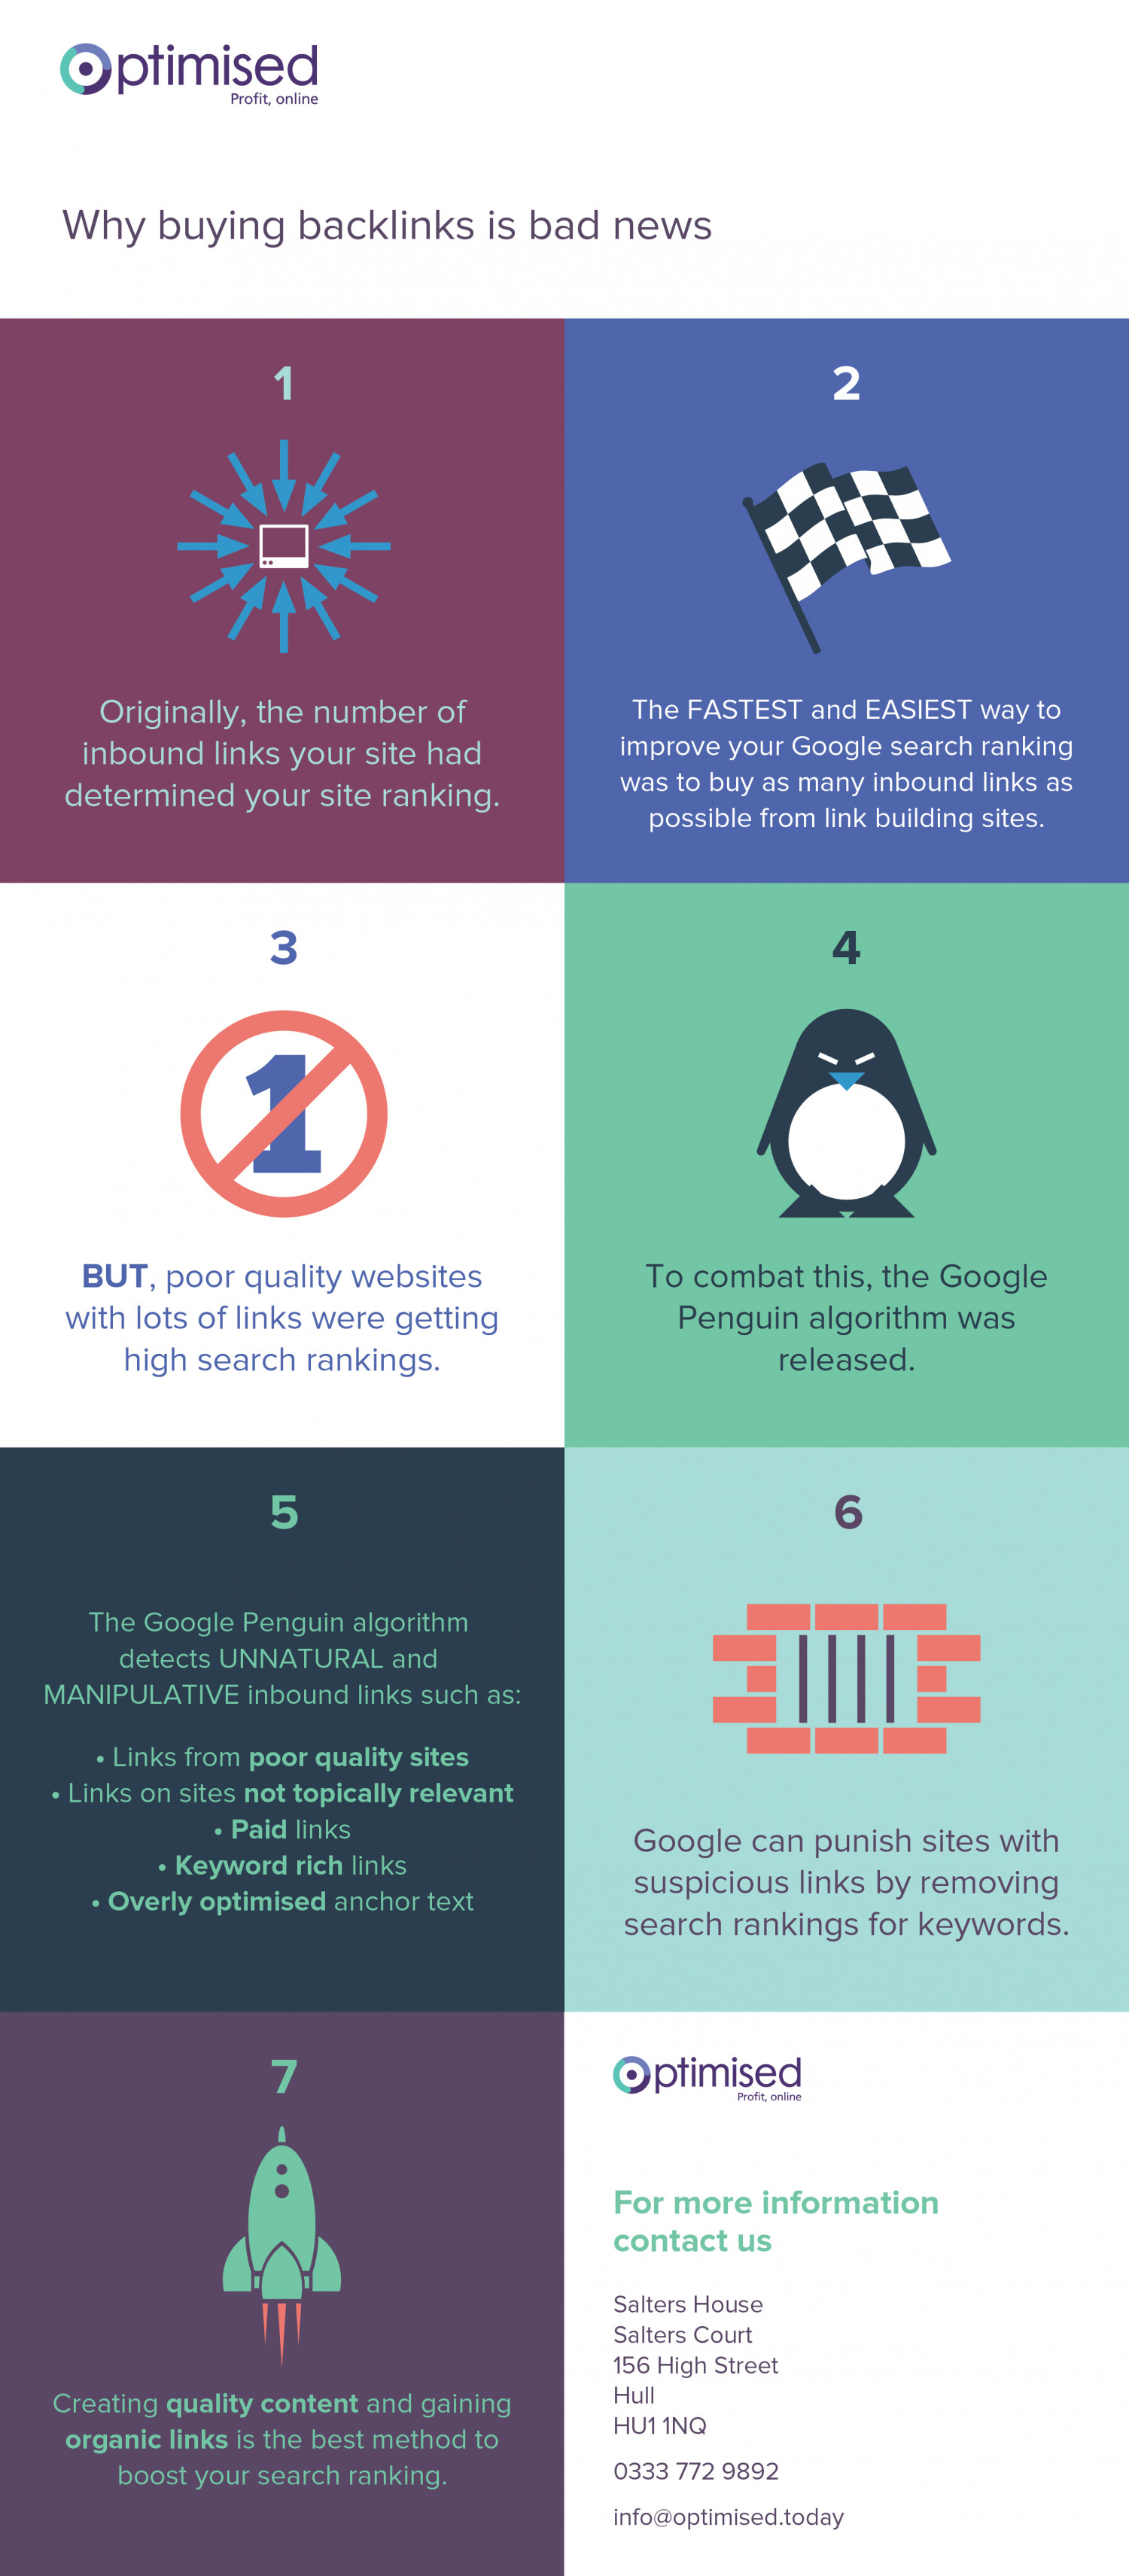 Optimised - Why buying backlinks is bad news Infographic